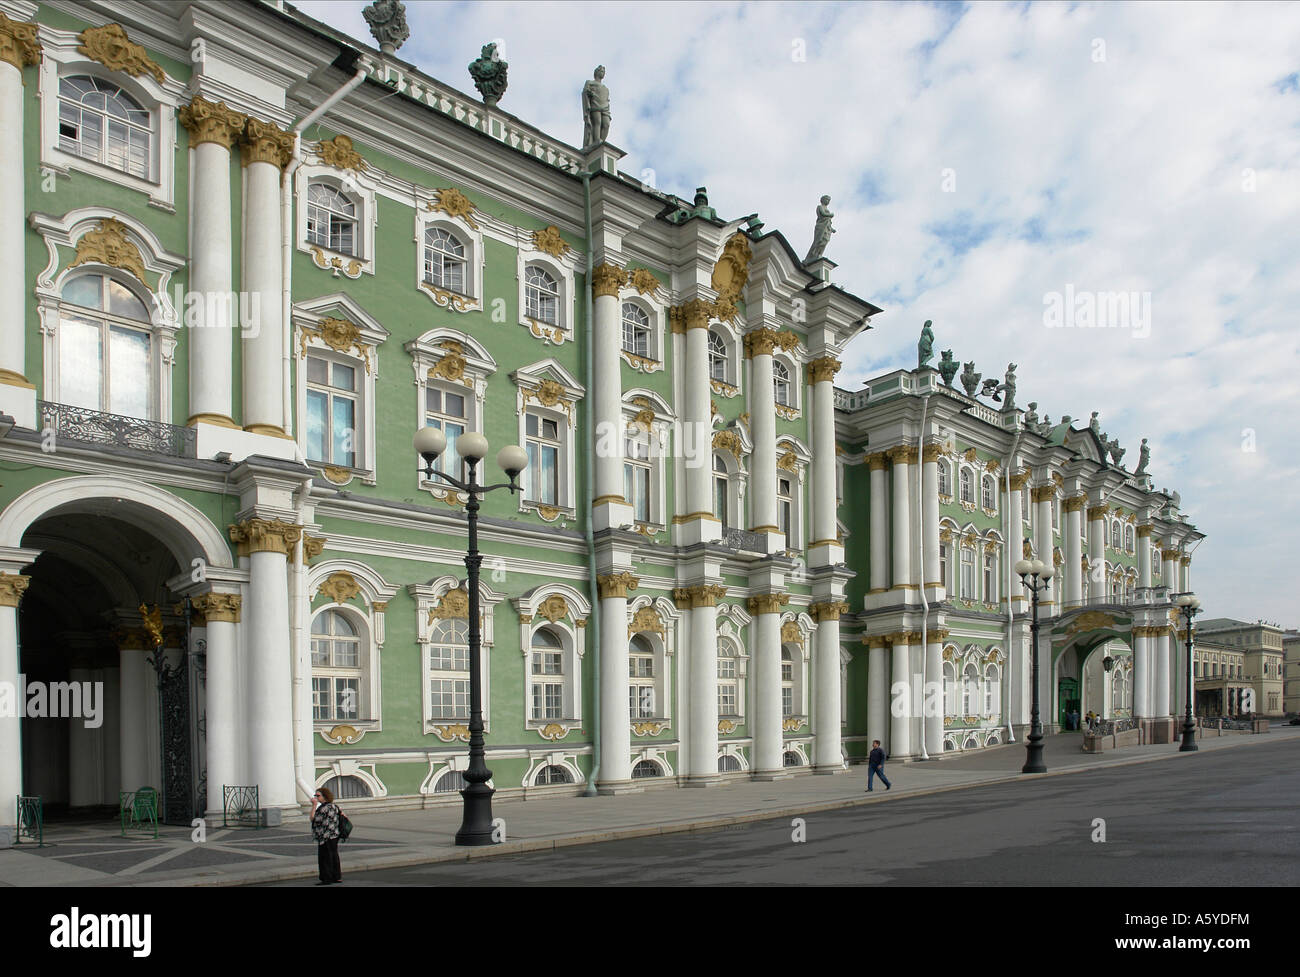 Painet jj2016 russia hermitage art gallery housed winter palace saint st. petersburg 20060801 2 architecture europe eastern Stock Photo